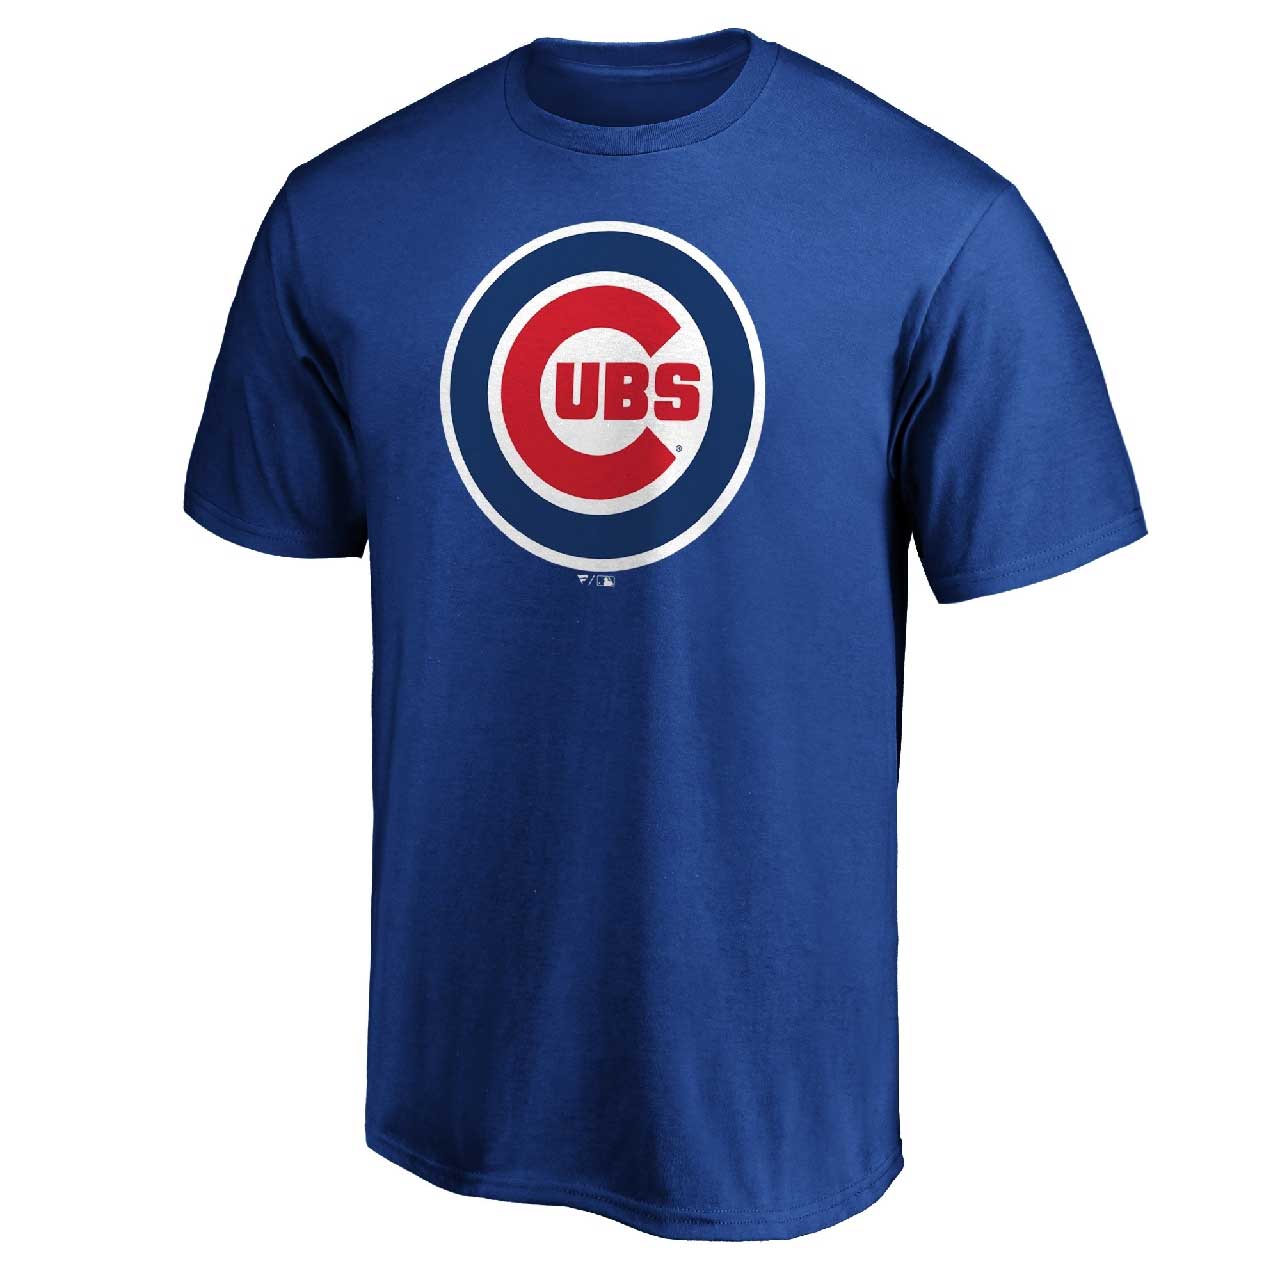 Women's Fanatics Branded Royal/Red Chicago Cubs Plus Size